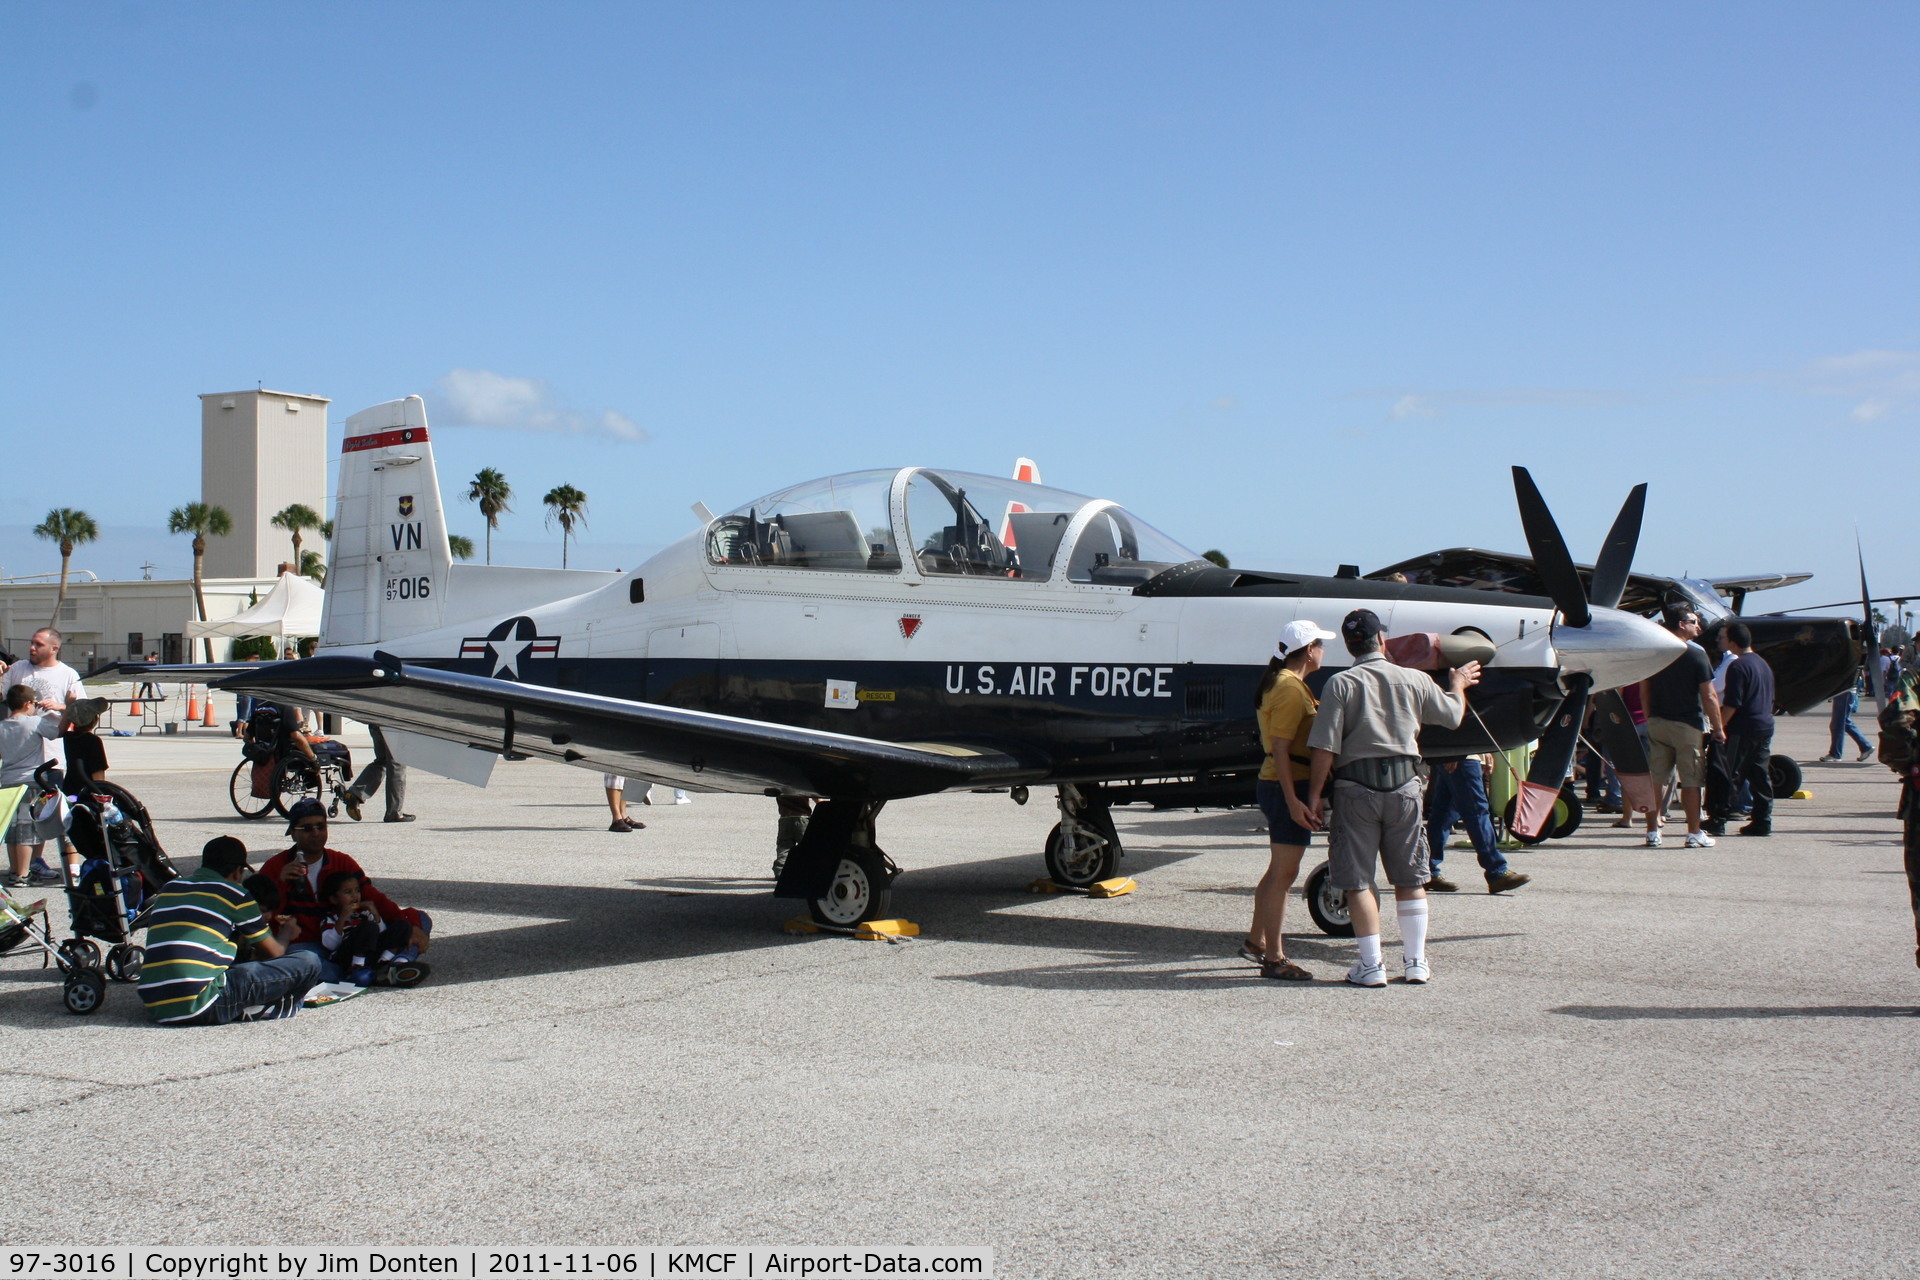 97-3016, 1997 Raytheon T-6A Texan II C/N PT-20, T-6 Texan II (97-3016) from the  8th Flying Training Squadron at Vance Air Force Base on display at MacDill Air Fest